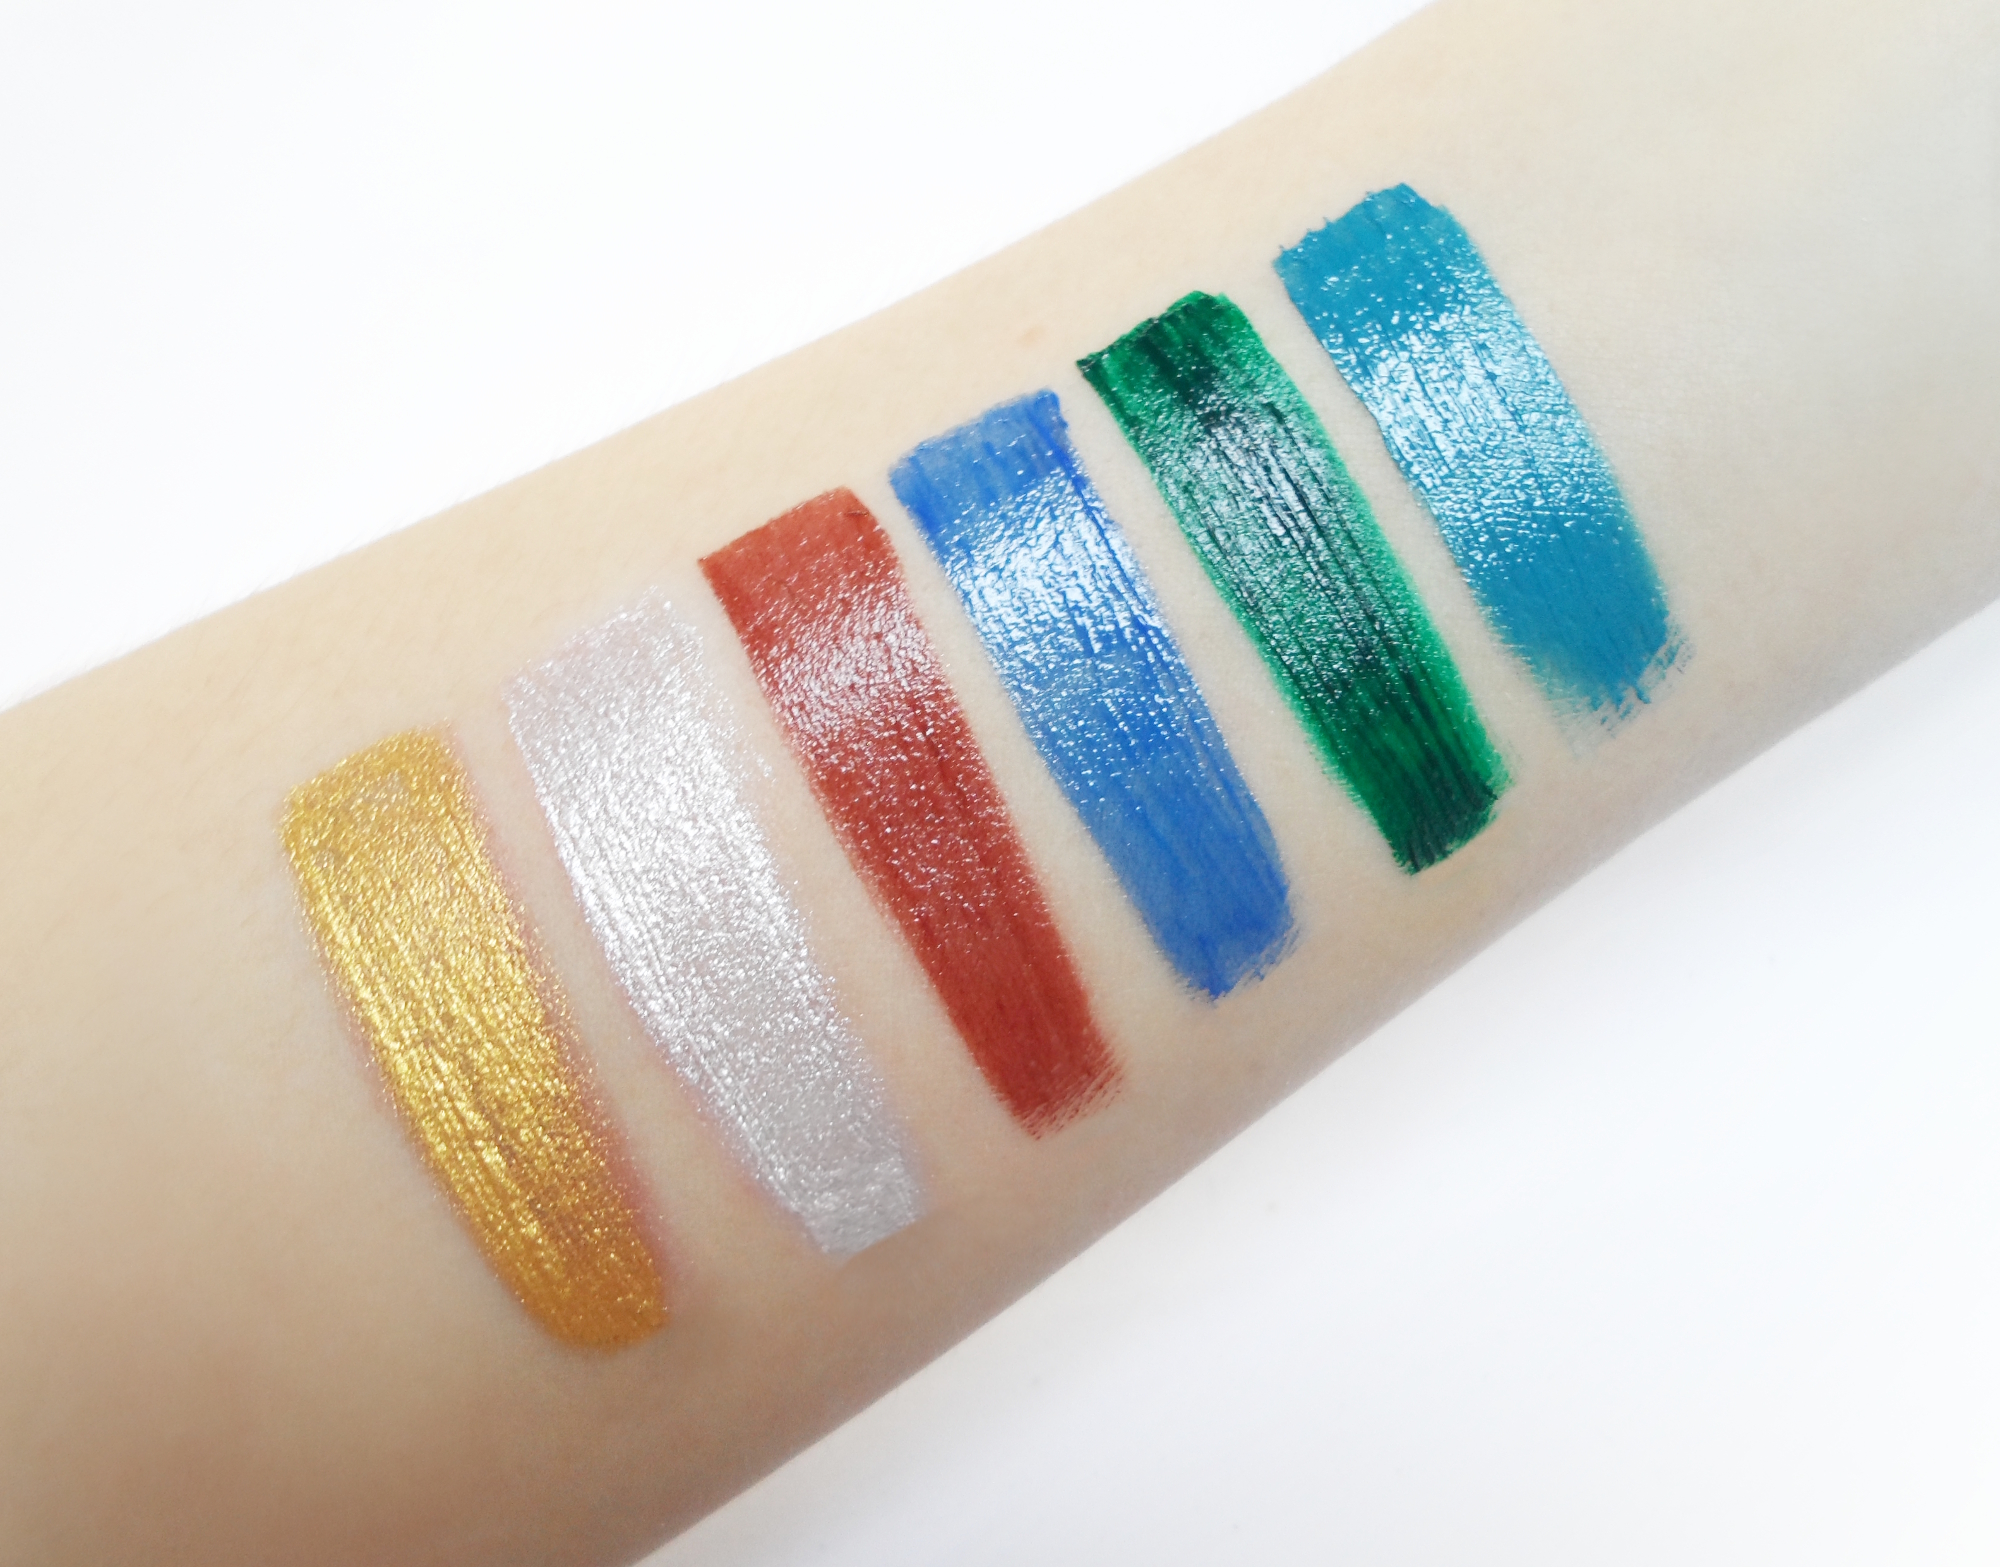 close-up of a makeup greasepaint swatches on the skin